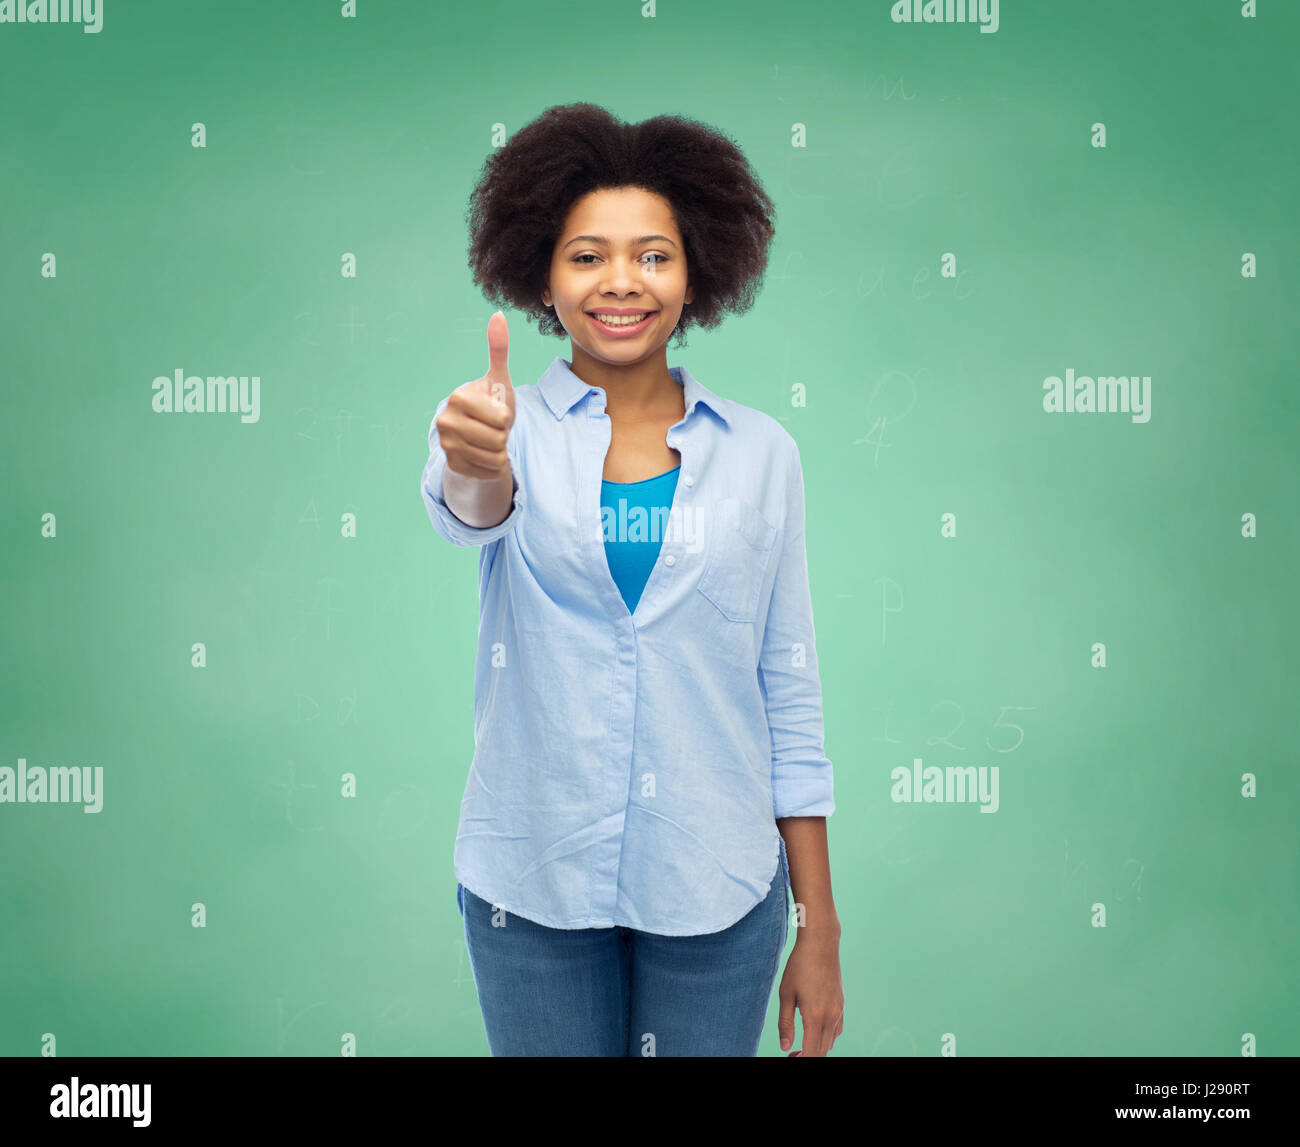 happy afro american woman showing thumbs up Stock Photo